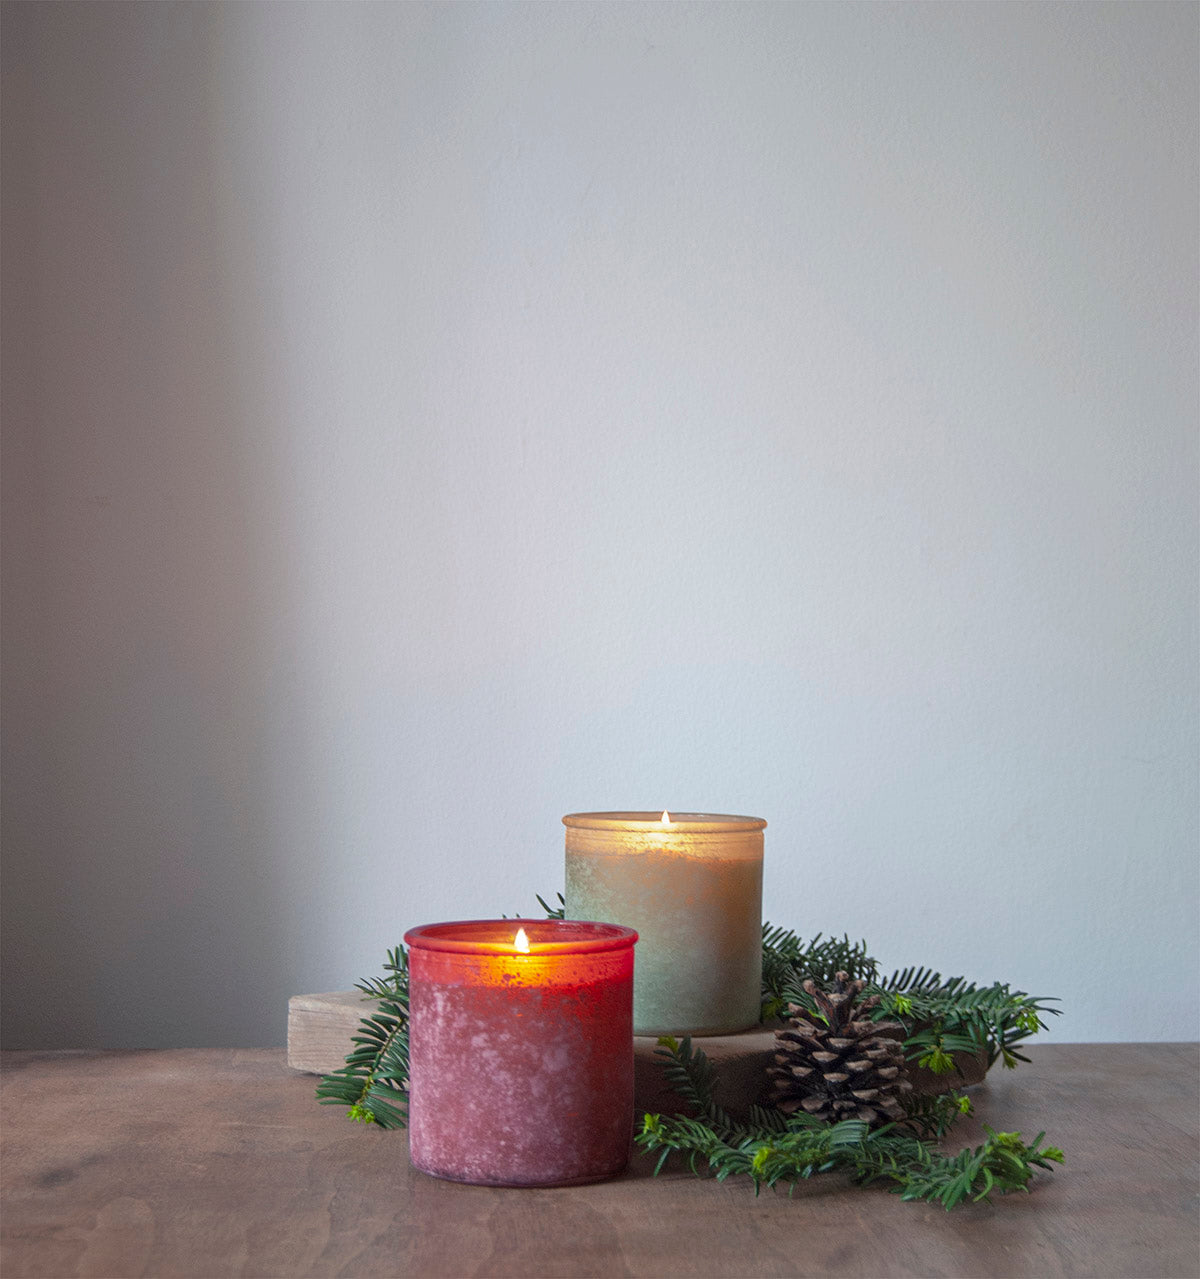 Arrow River Rock Candle in Sage Candle Eleven Point   